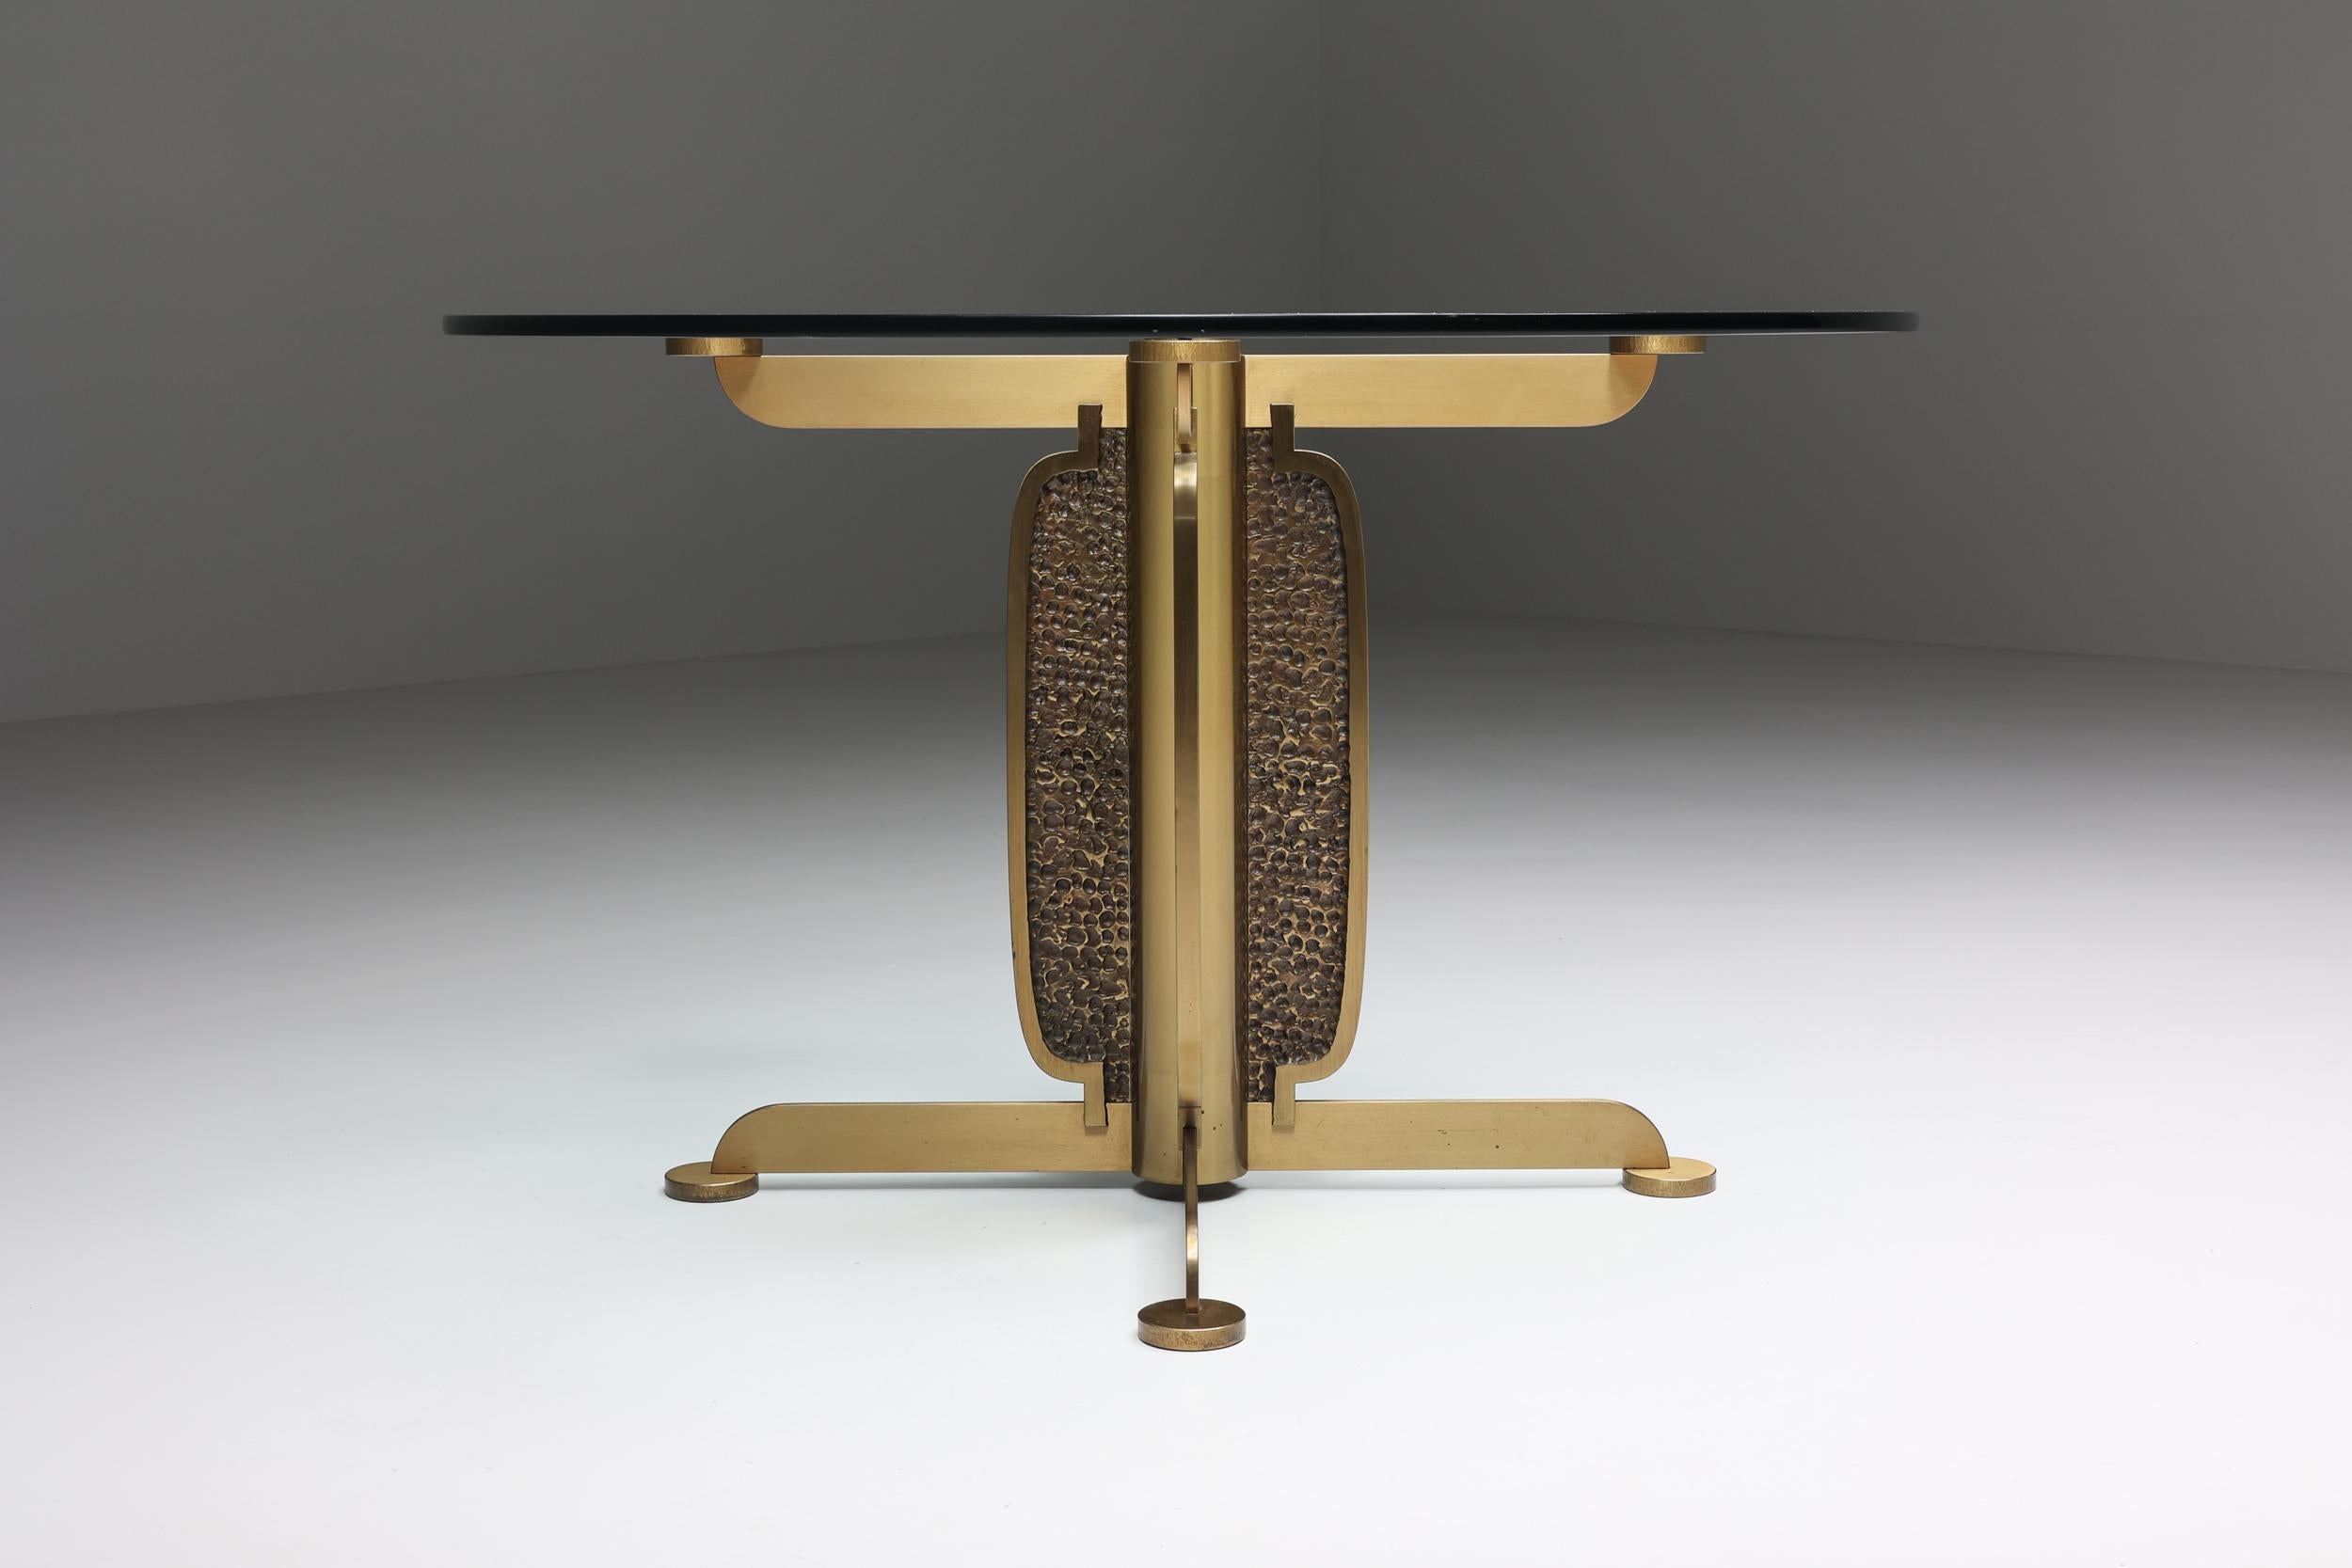 Postmodern; Brutalist; Hollywood Regency; brass round dining table by Luciano Frigerio, Italy, 1970s

Postmodern sculptural brass cast dining table with glass top designed by Luciano Frigerio in Italy in the 1970s. The cross-shaped brass frame